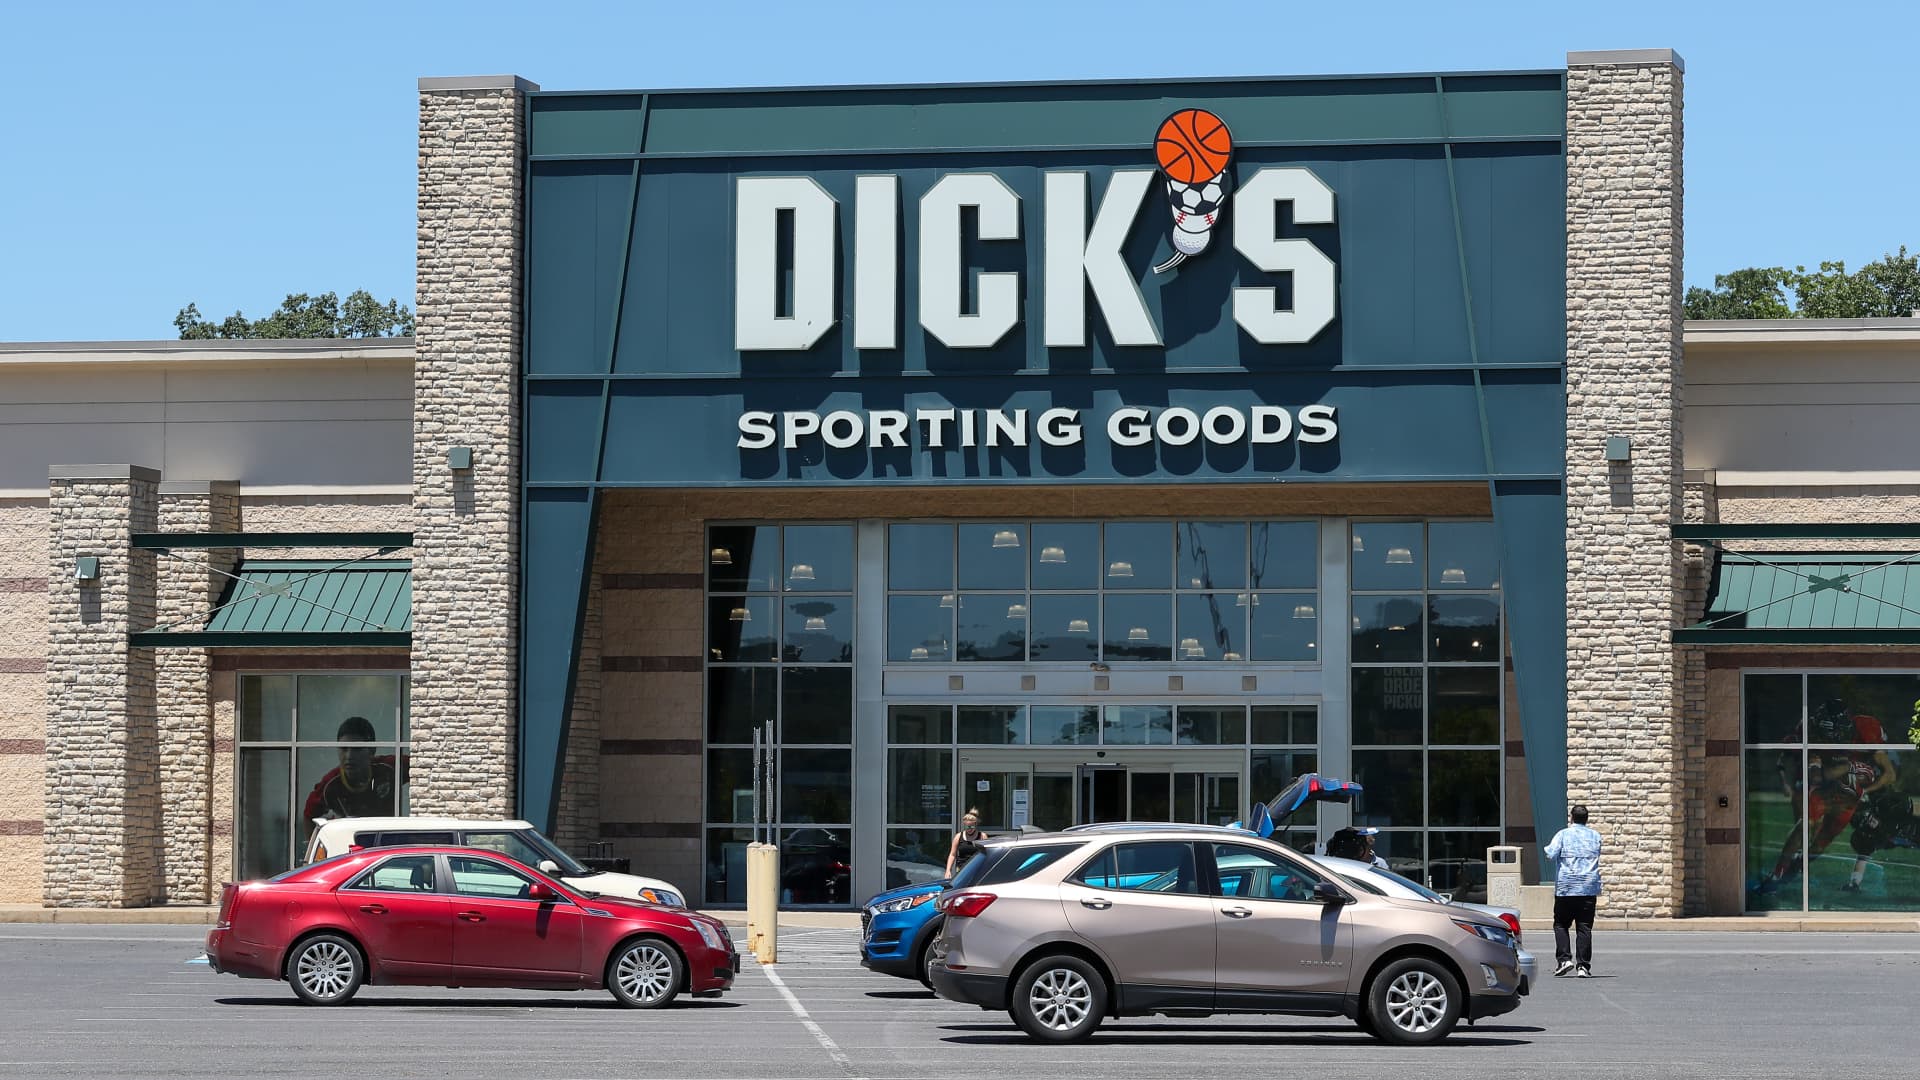 Stocks making the biggest moves midday: Dick's Sporting Goods, Nordstrom, Wendy's and more